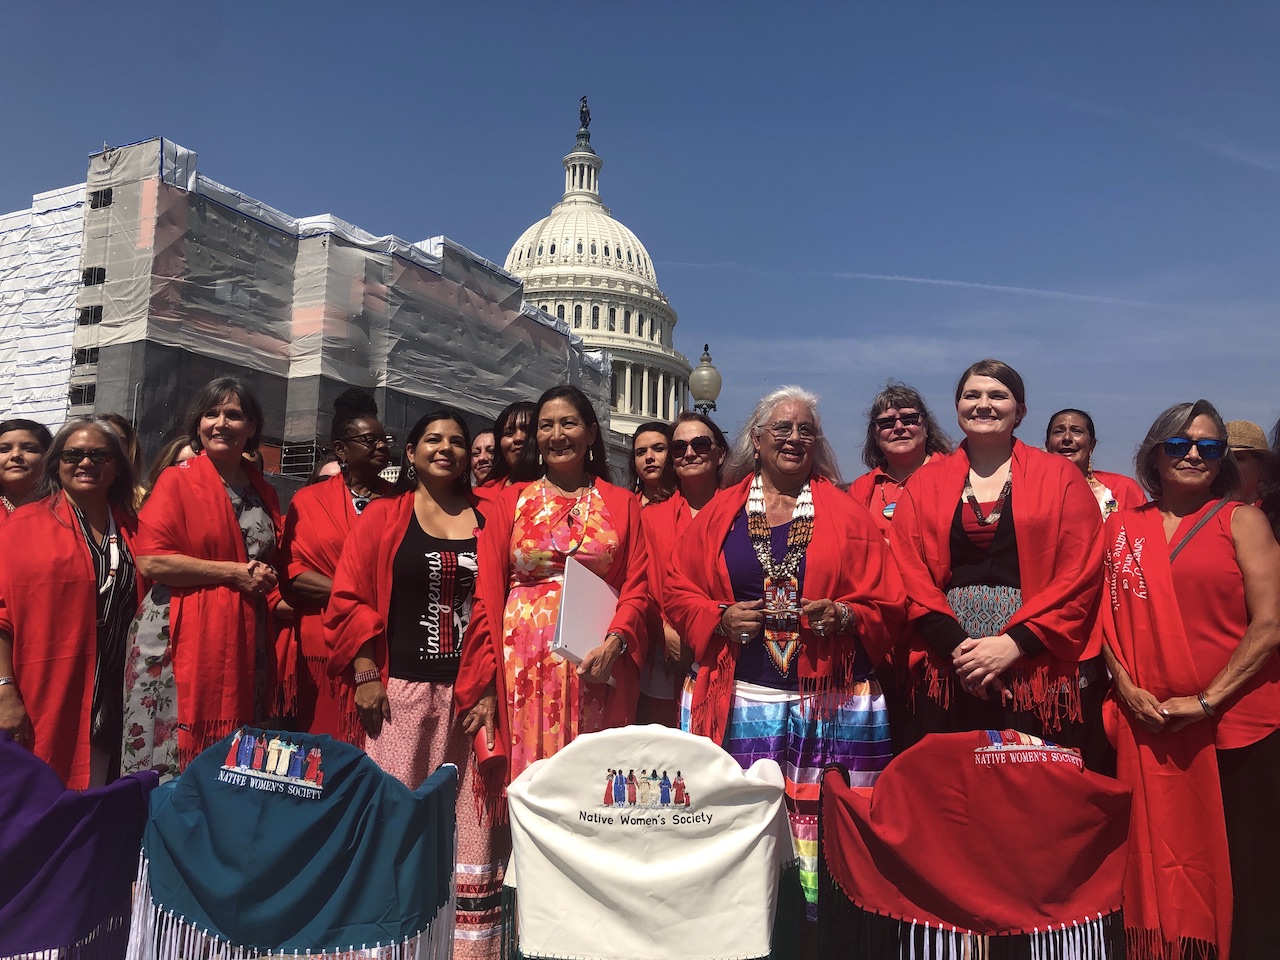 RECAP: Sovereignty and Native Women's Safety at US Capitol